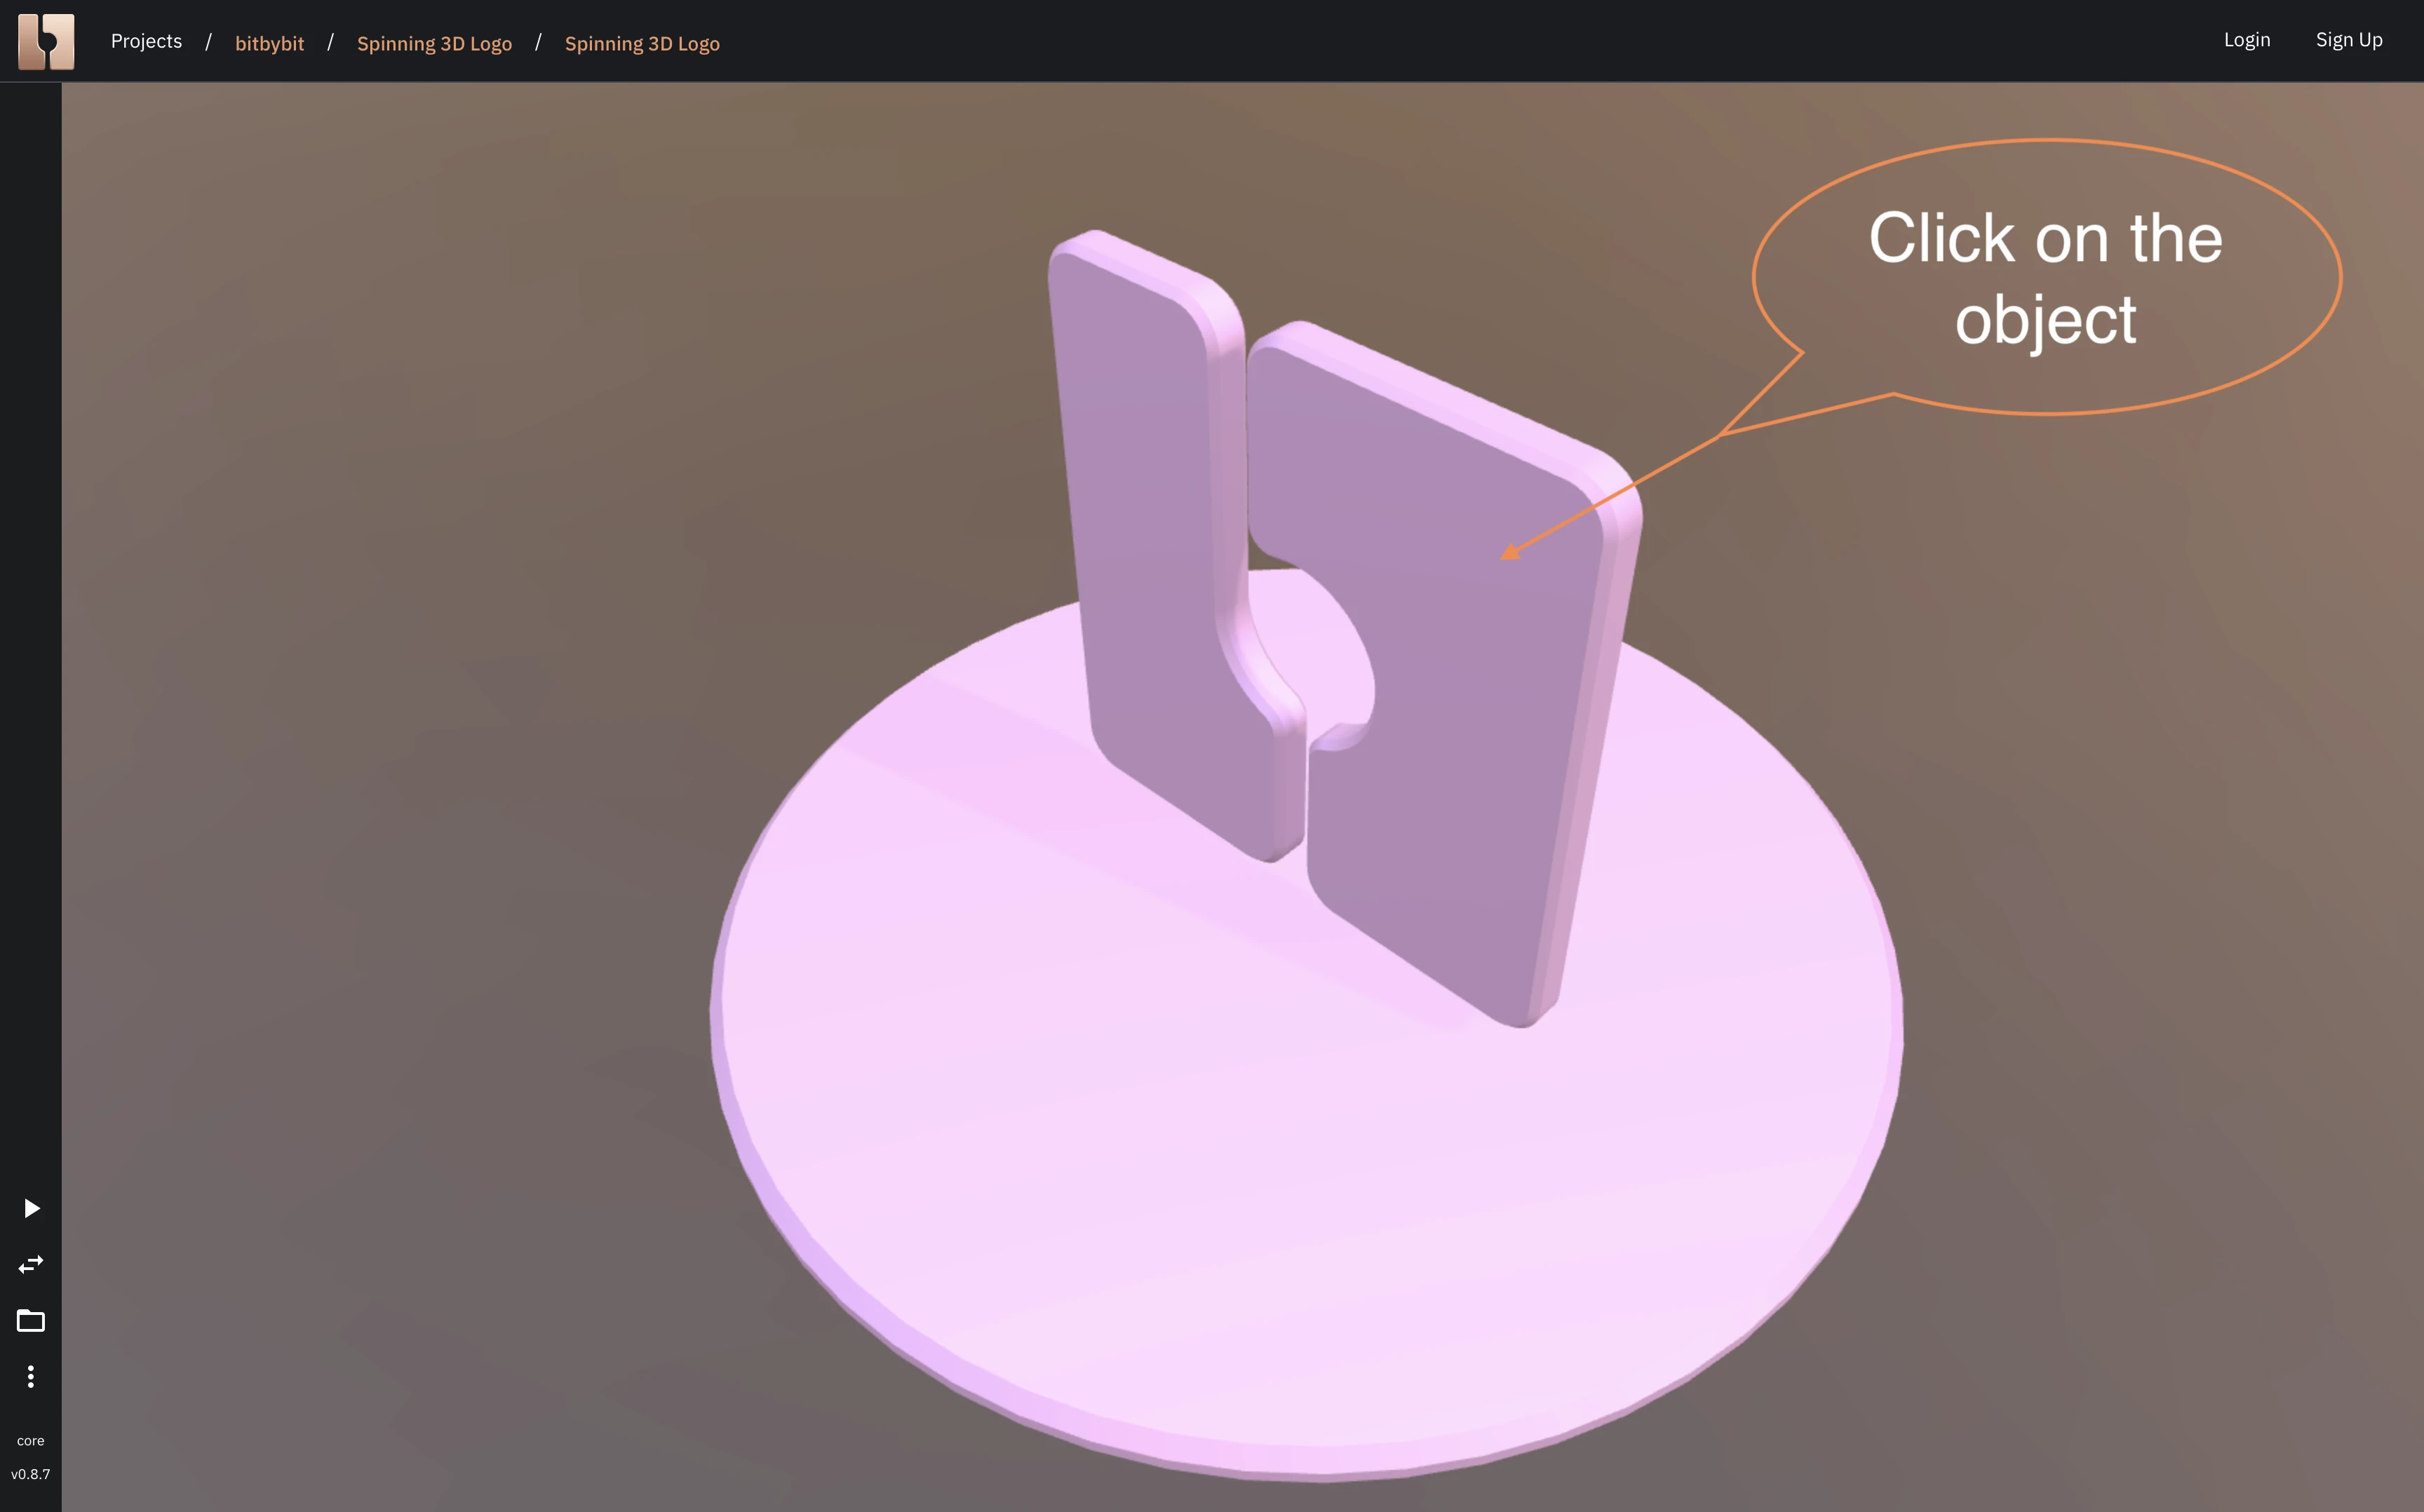 Picture shows how to click 3D object of the logo in the scene